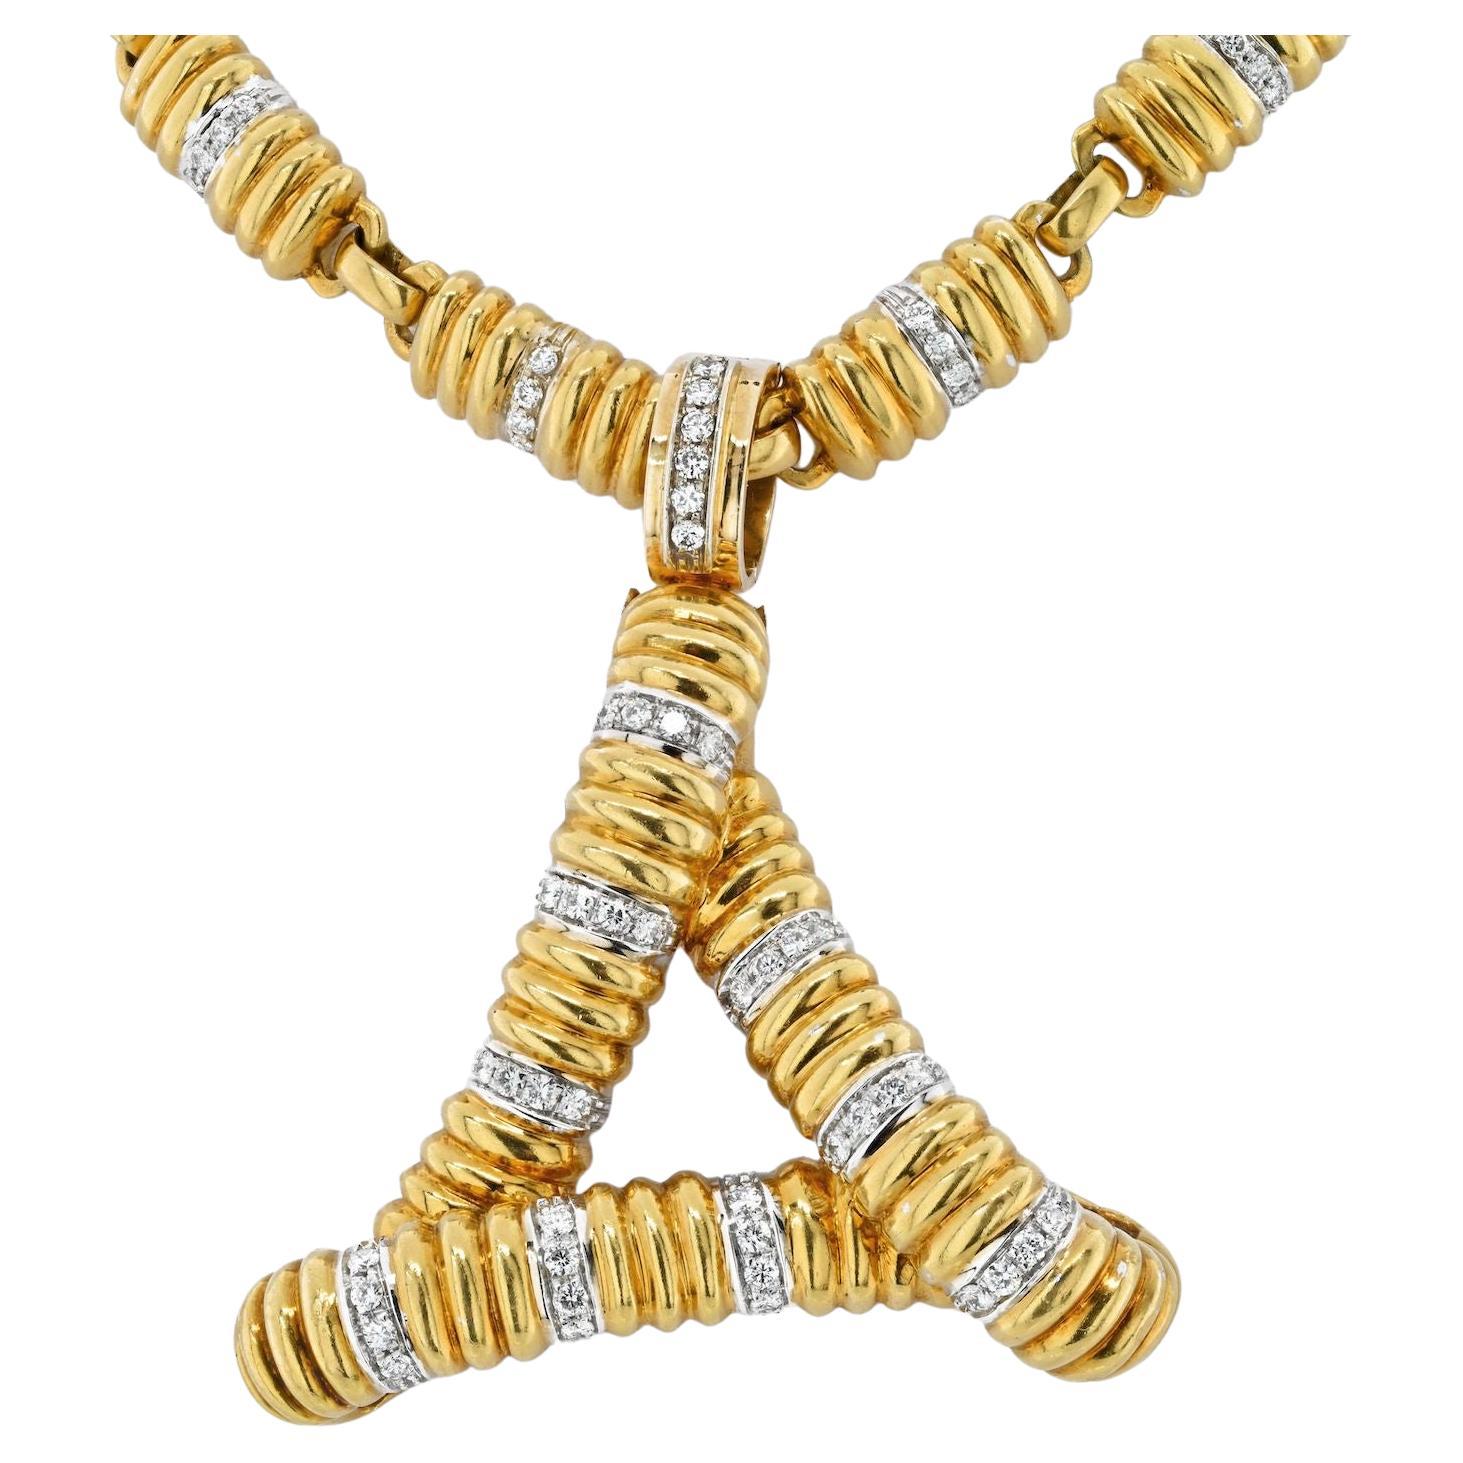 Gucci 18k Yellow Gold Diamond Link and Pendant Necklace